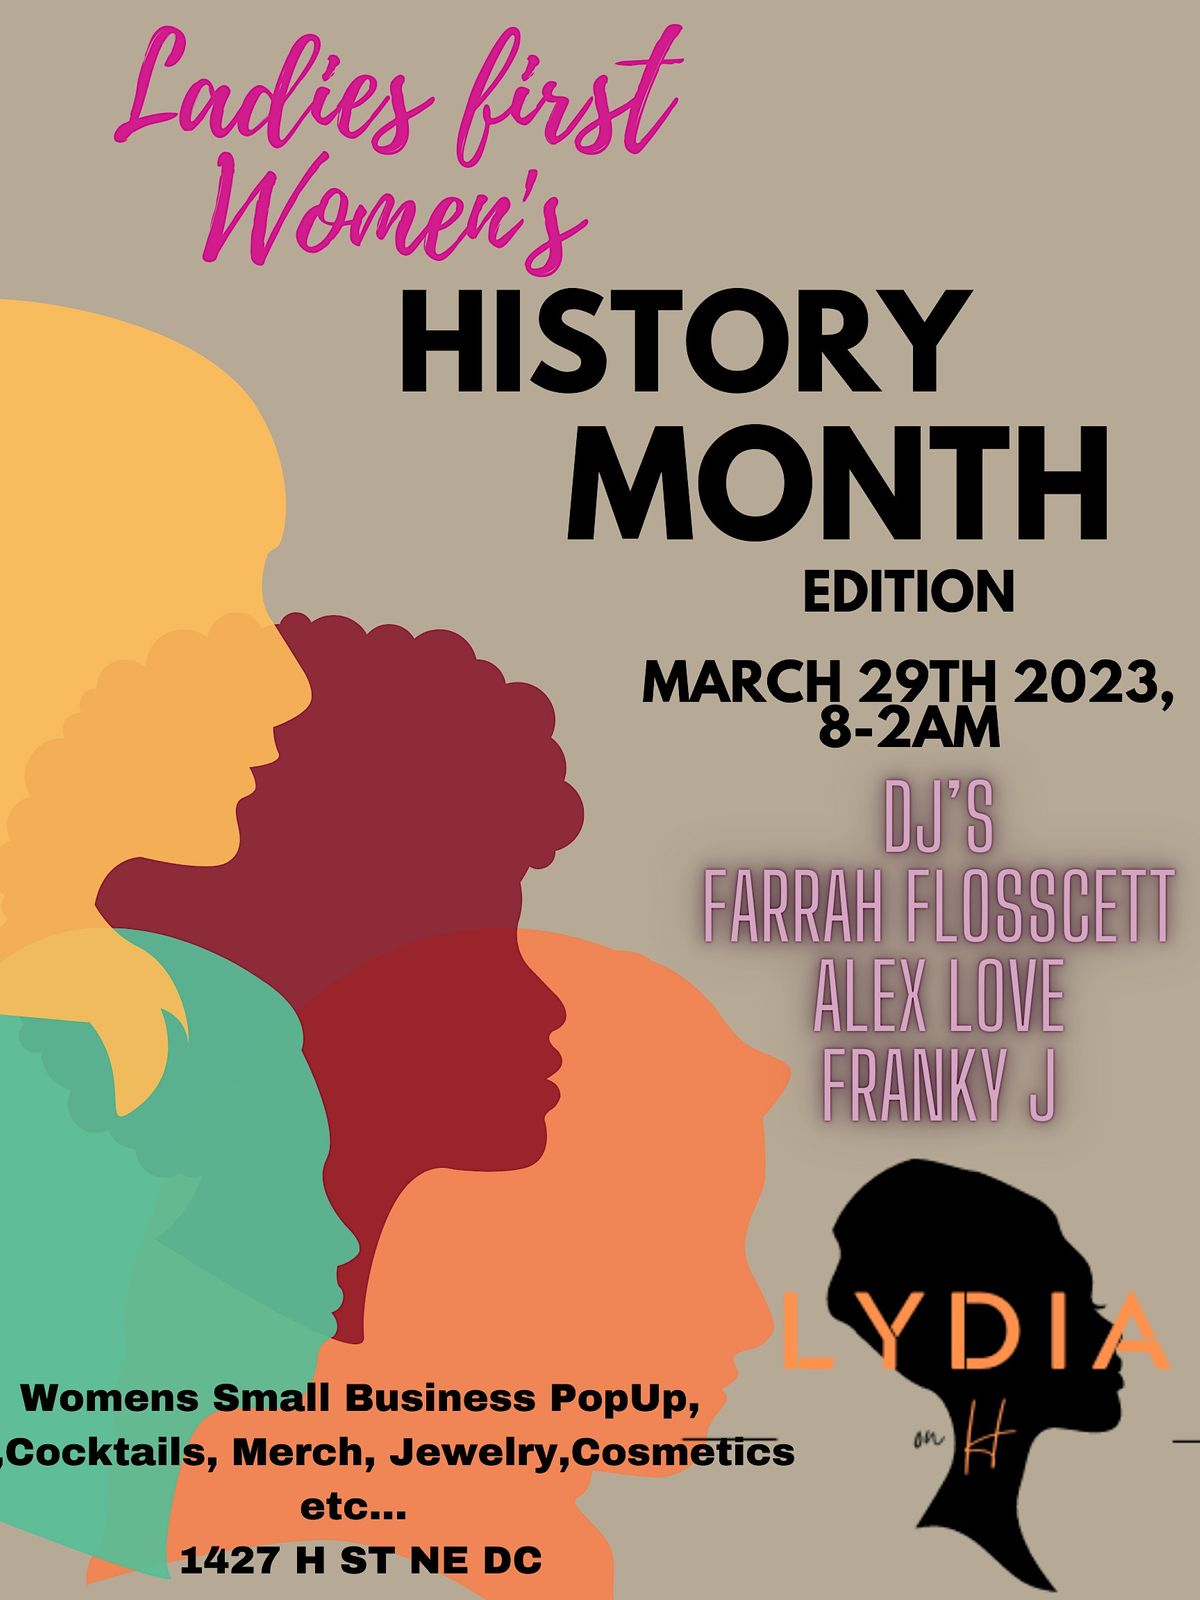 LADIES FIRST LADIES NIGHT ! WOMENS HISTORY MONTH EDITION @ LYDIA ON H,